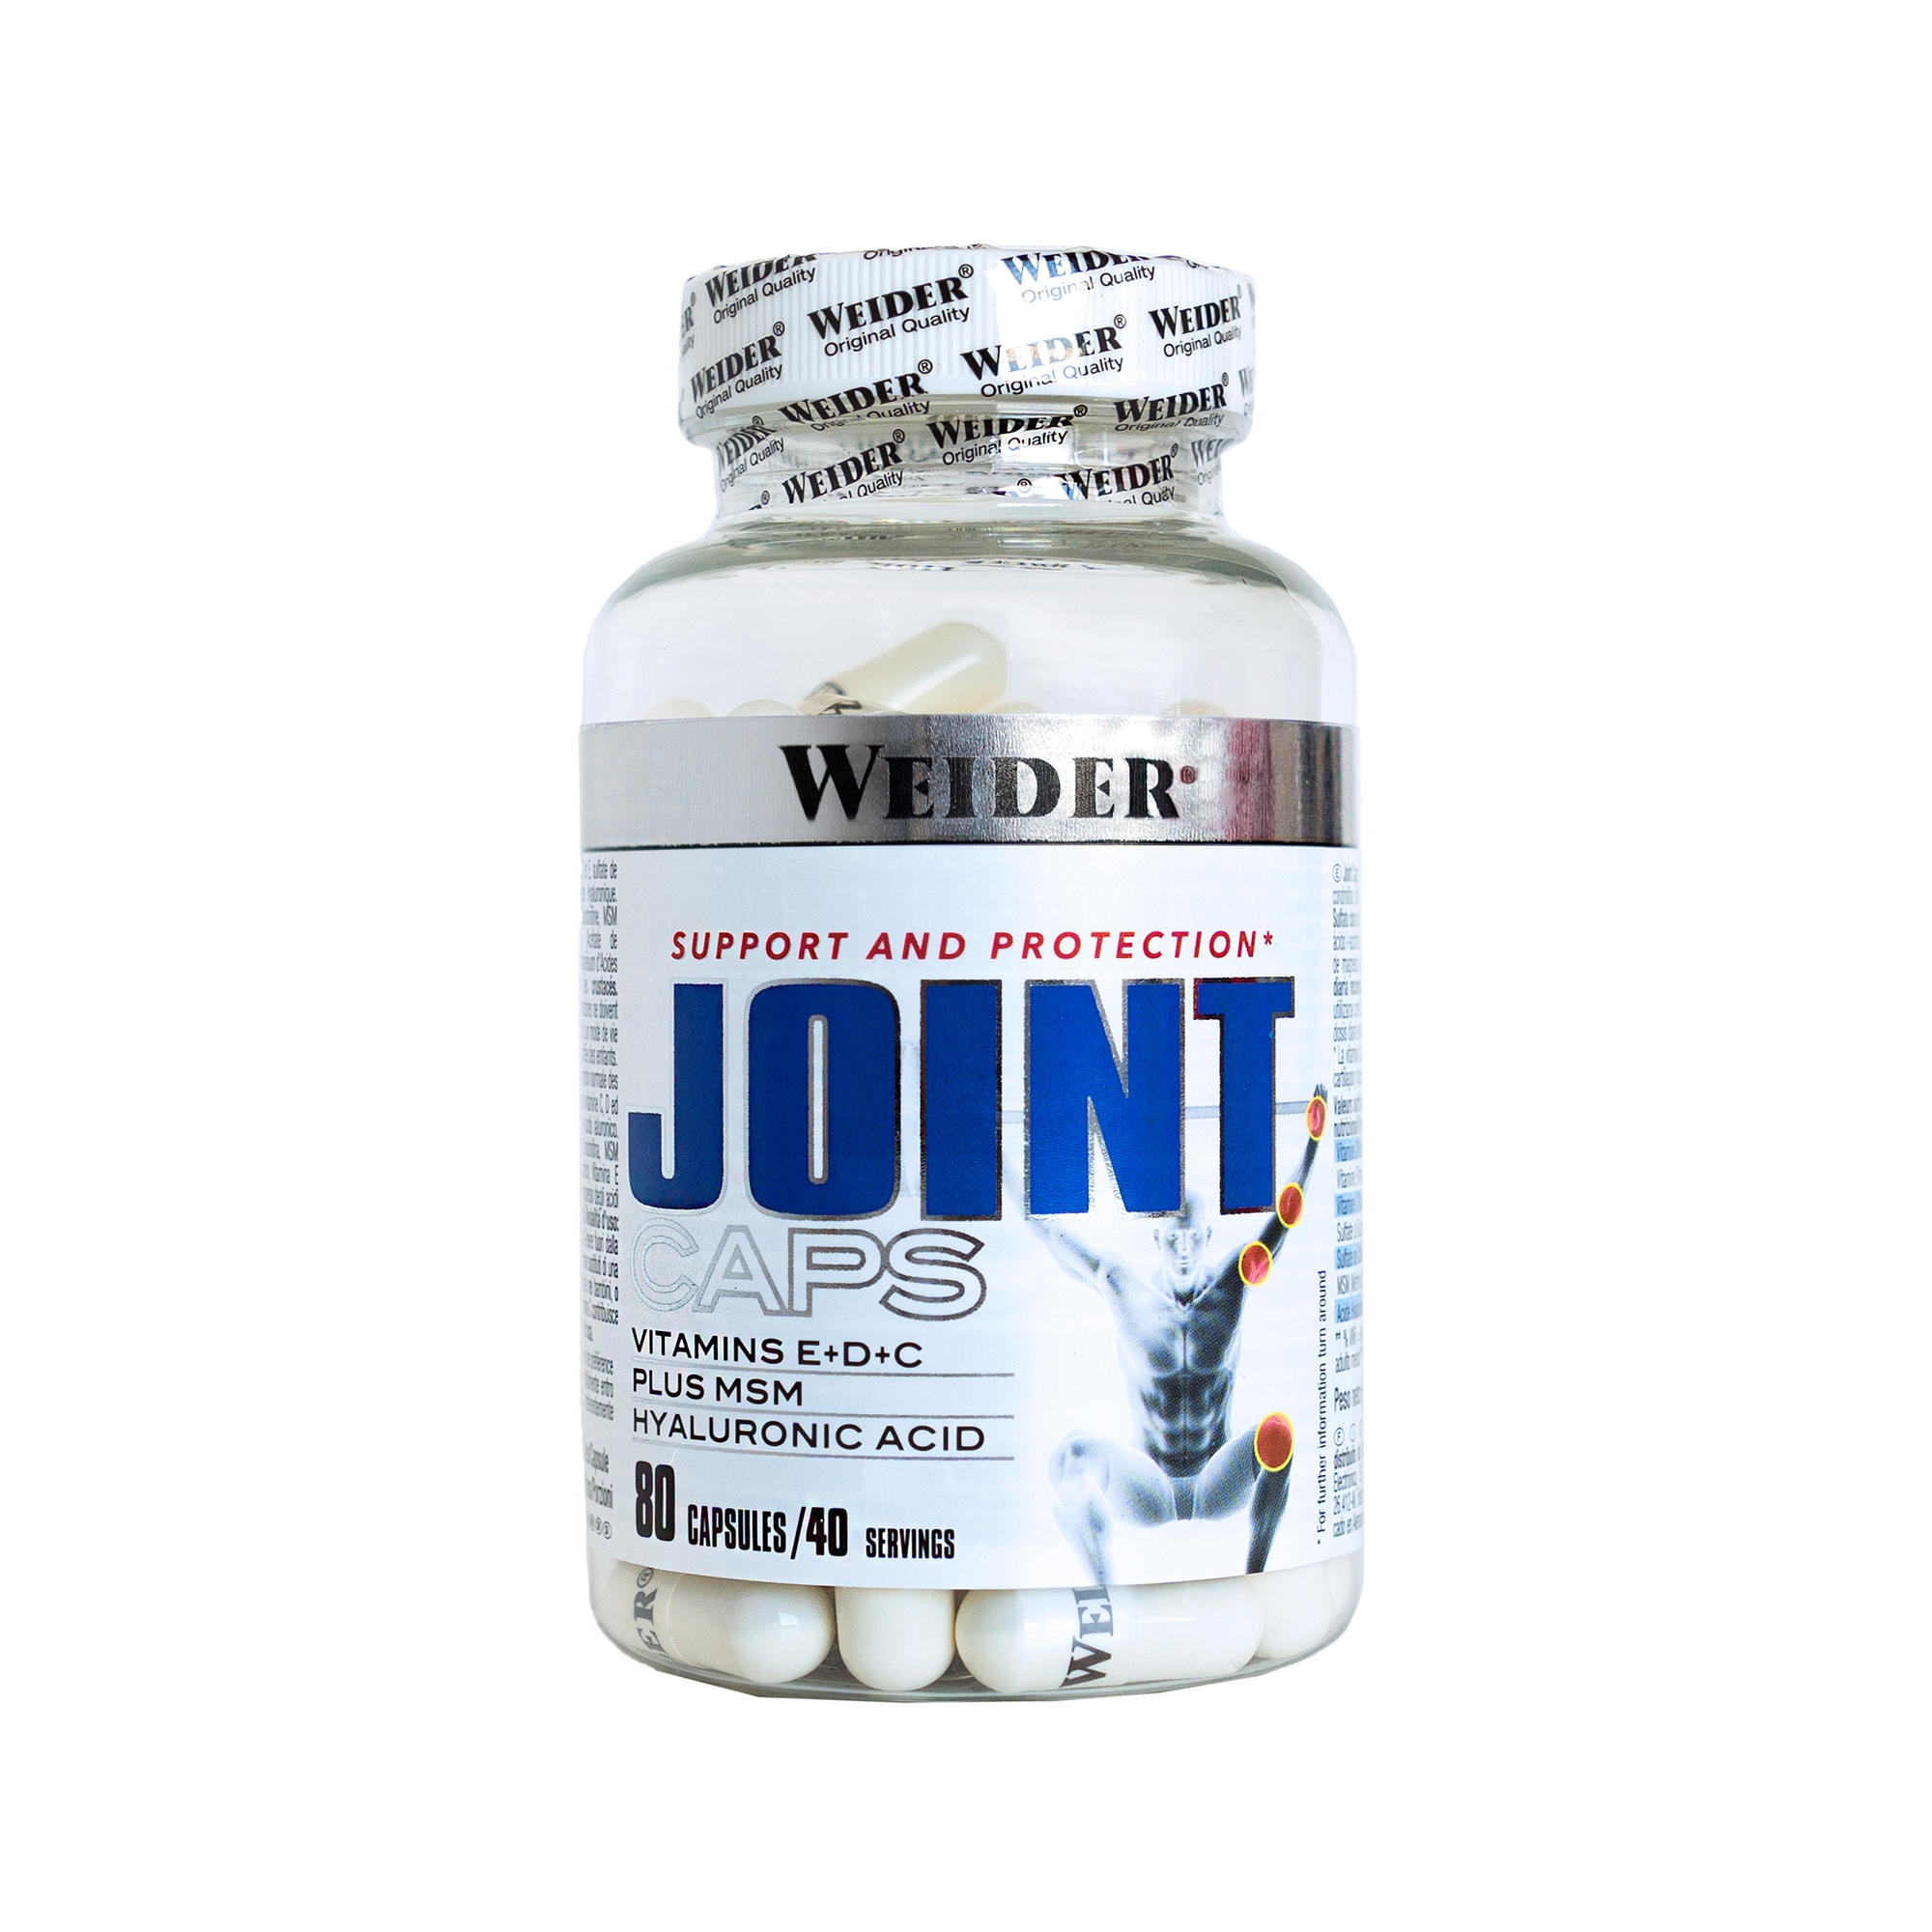 WEIDER JOINT CAPS 80cps